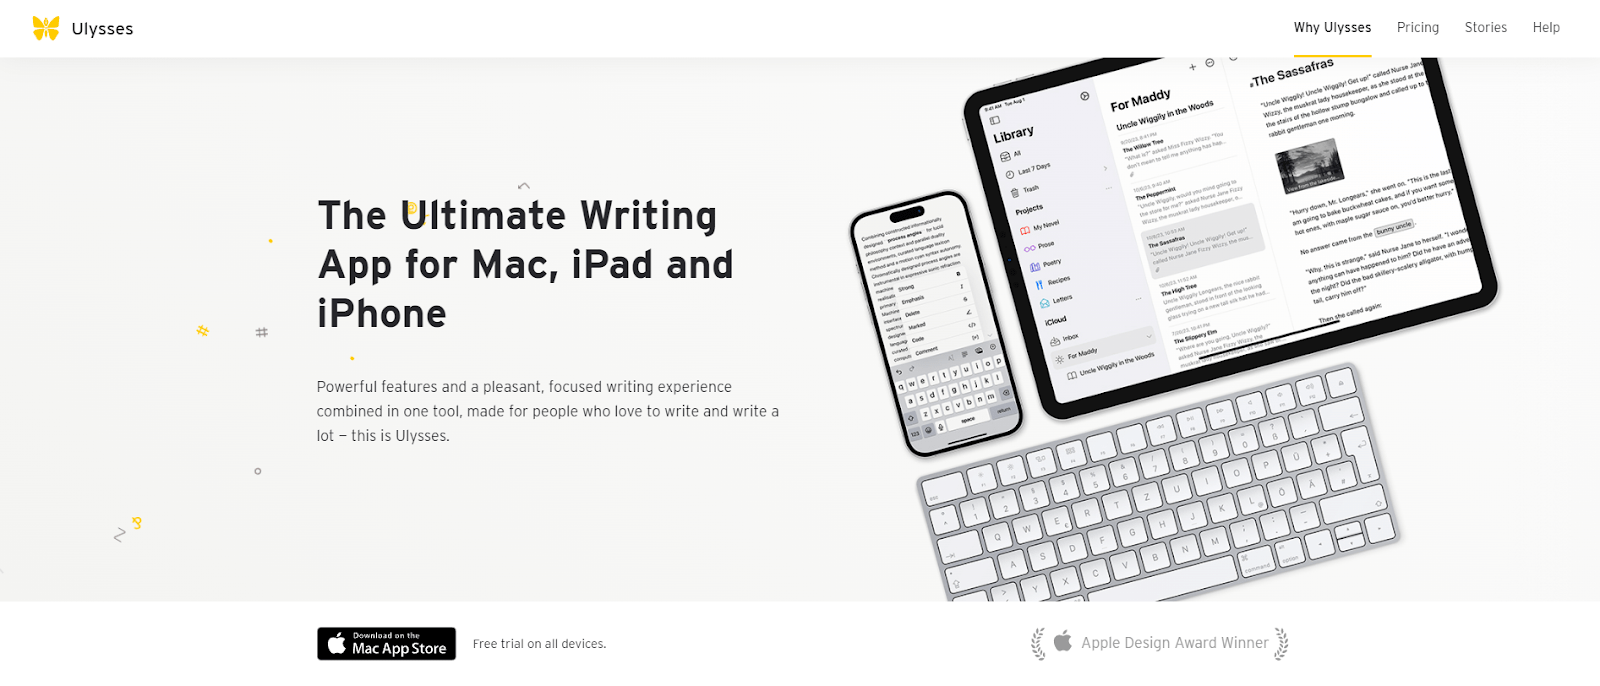 Focus on writing with Ulysses’s distraction-free writing app